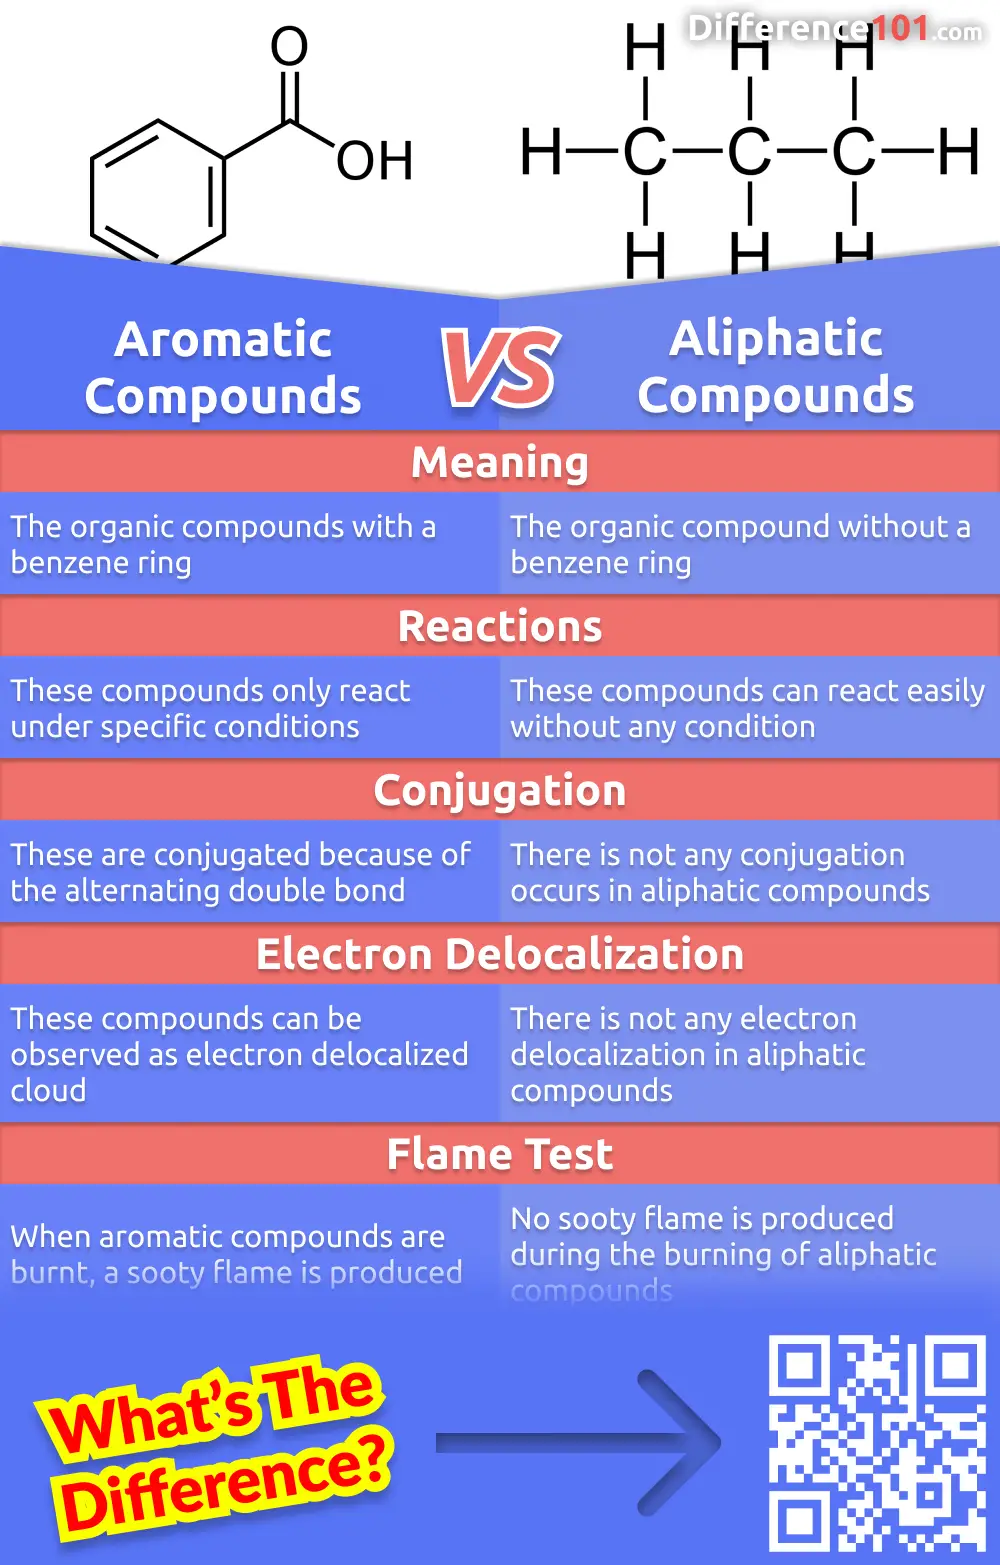 Aliphatic and aromatic compounds are both hydrocarbons, but they have different chemical and physical properties. Read more here to find out the difference between these two types of compounds. 